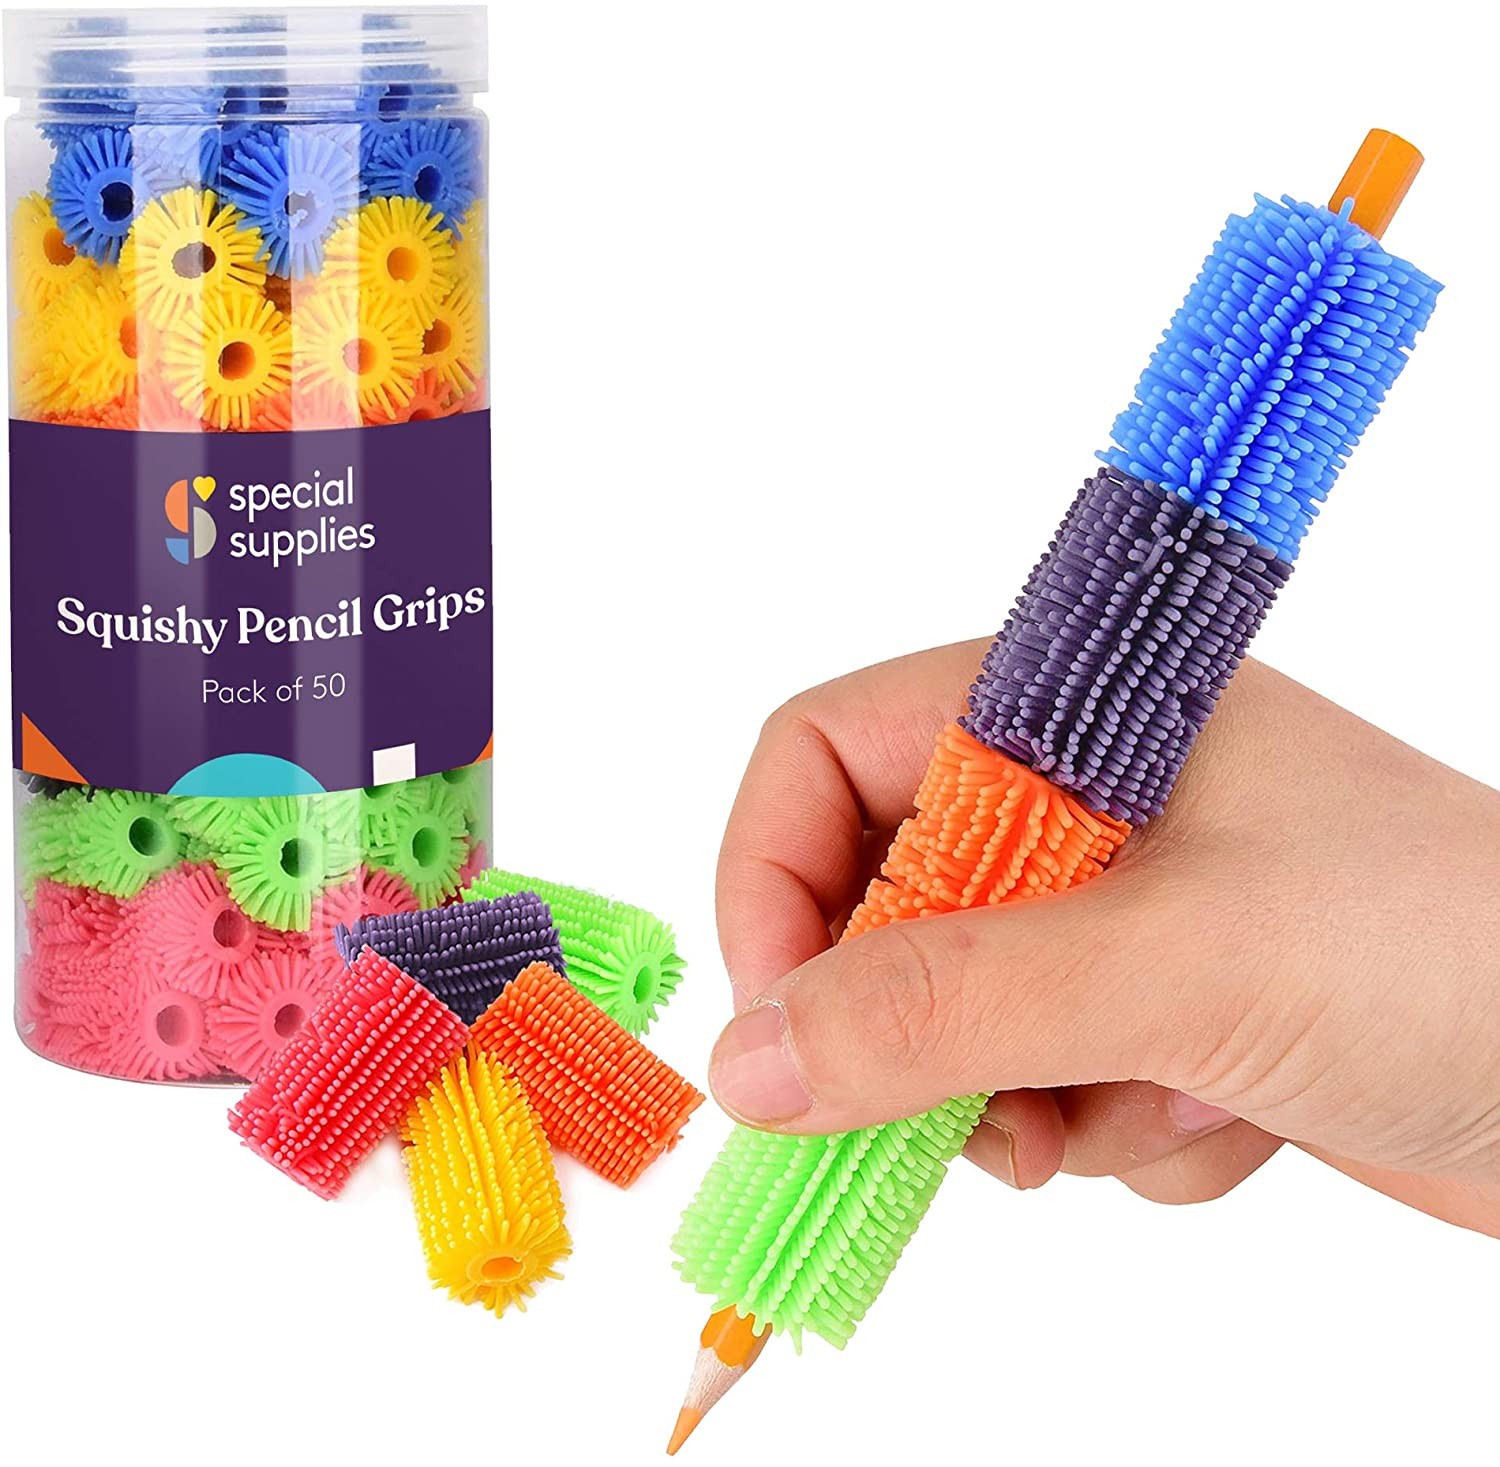 Special Supplies 50 Squishy Pencil Grips for Kids and Adults - Colorful, Cushioned Holders for Handwriting, Drawing, Coloring - Ergonomic Right or